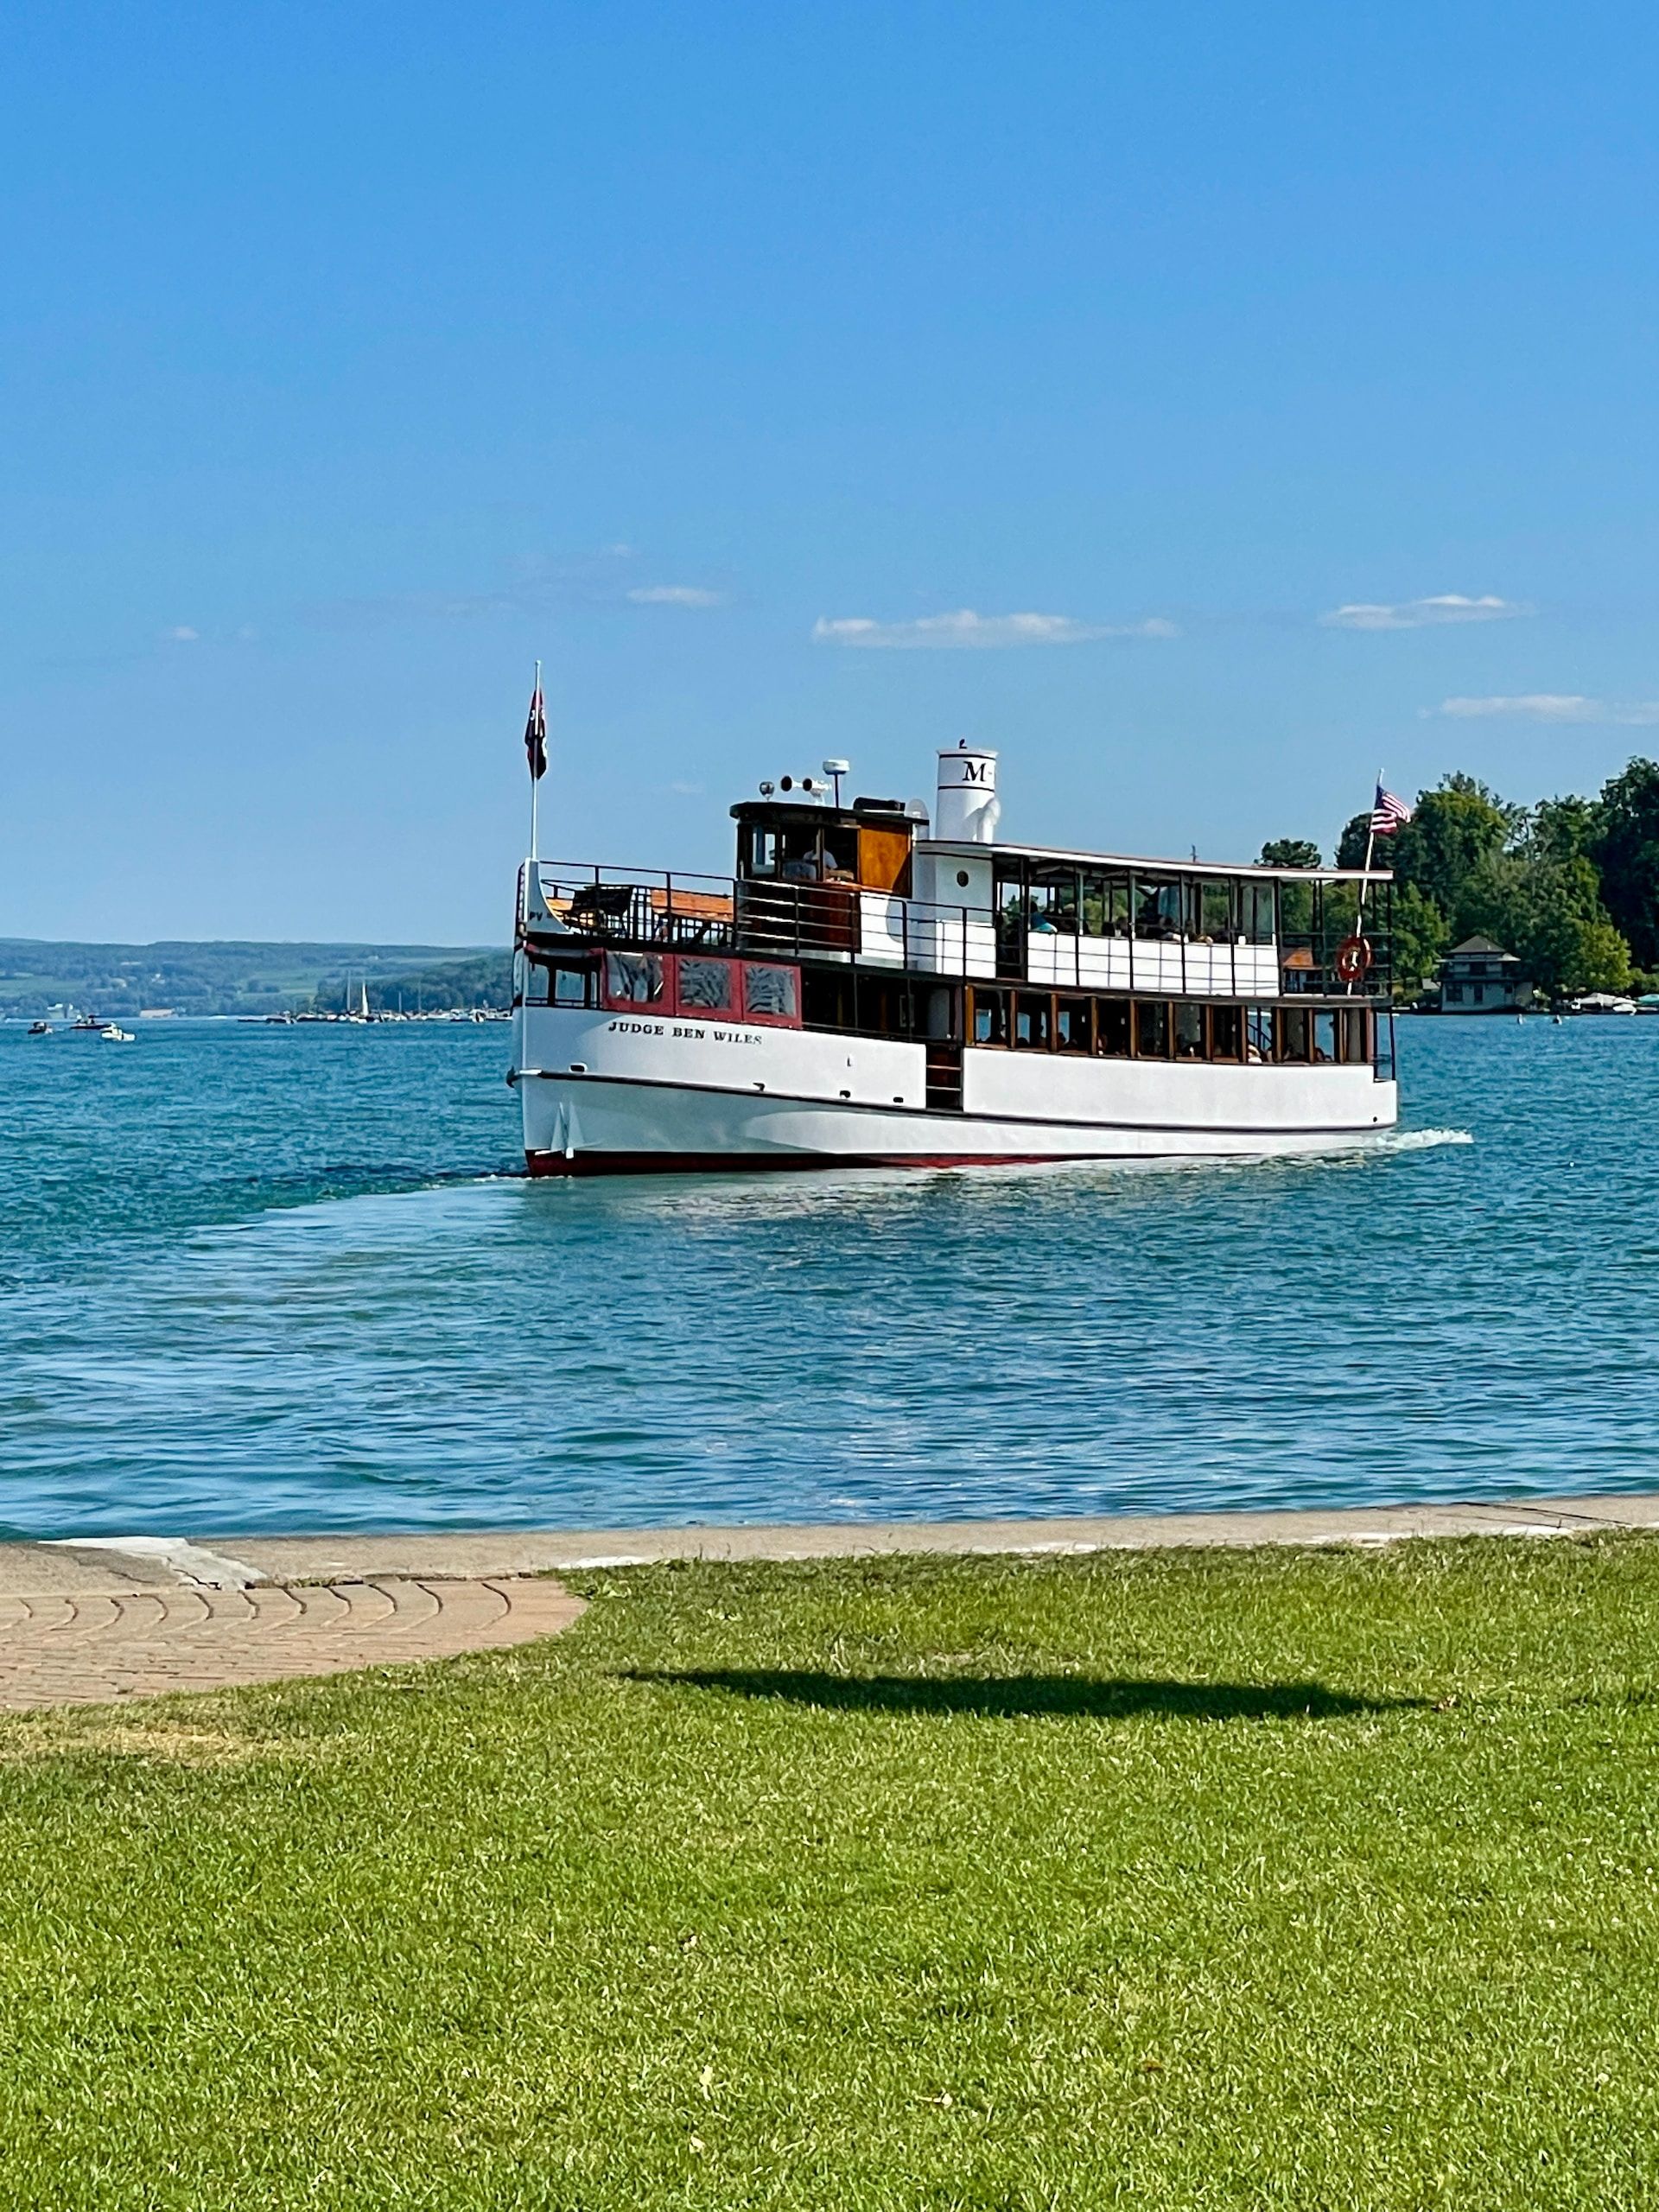 A boat on the shores of Skaneateles Lake, New York, USA